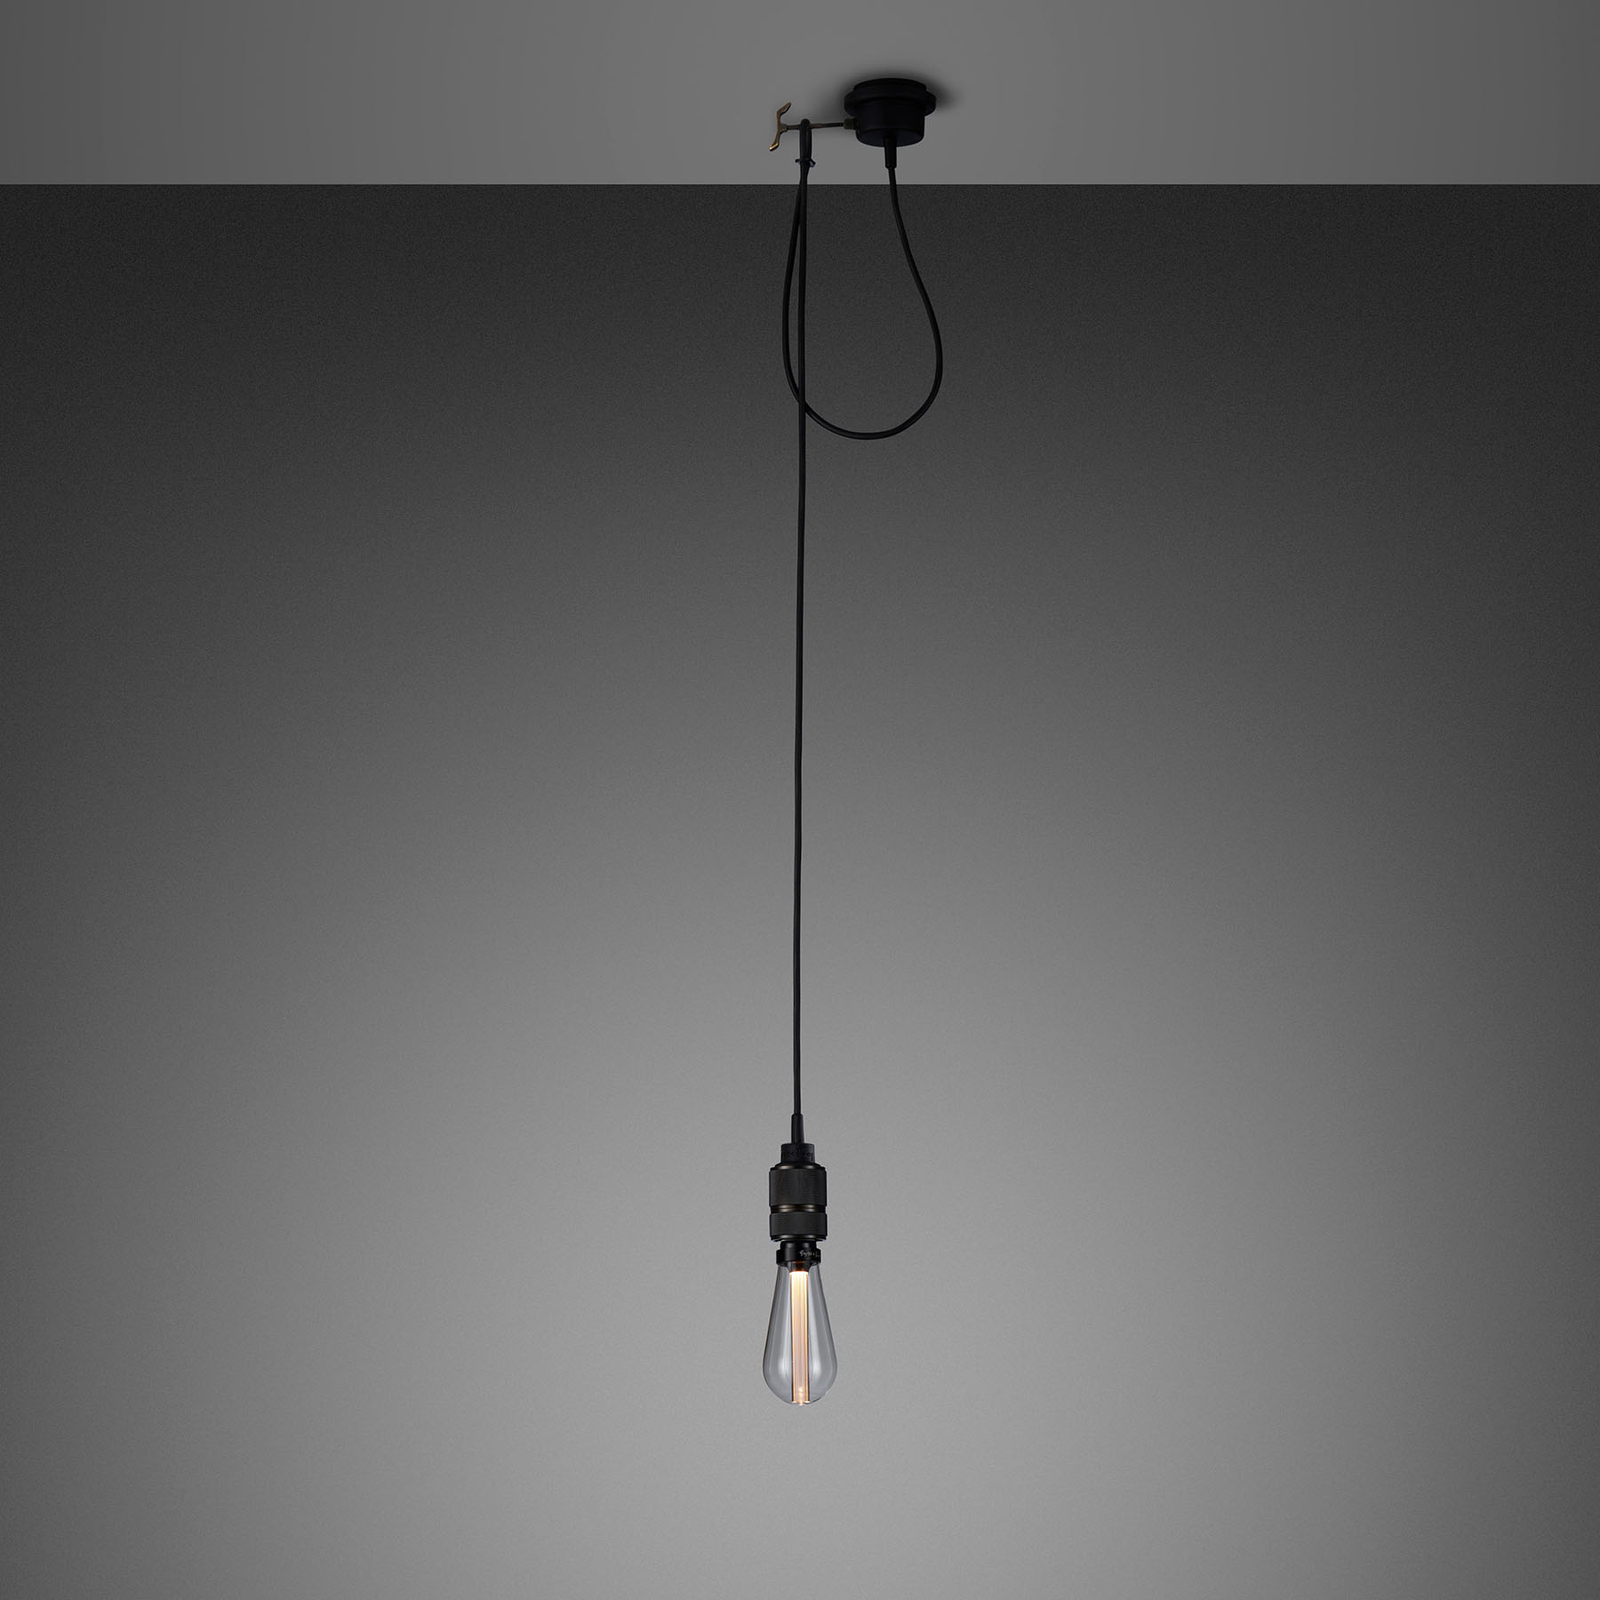 Buster + Punch Hooked 1.0 nude hanging bronze